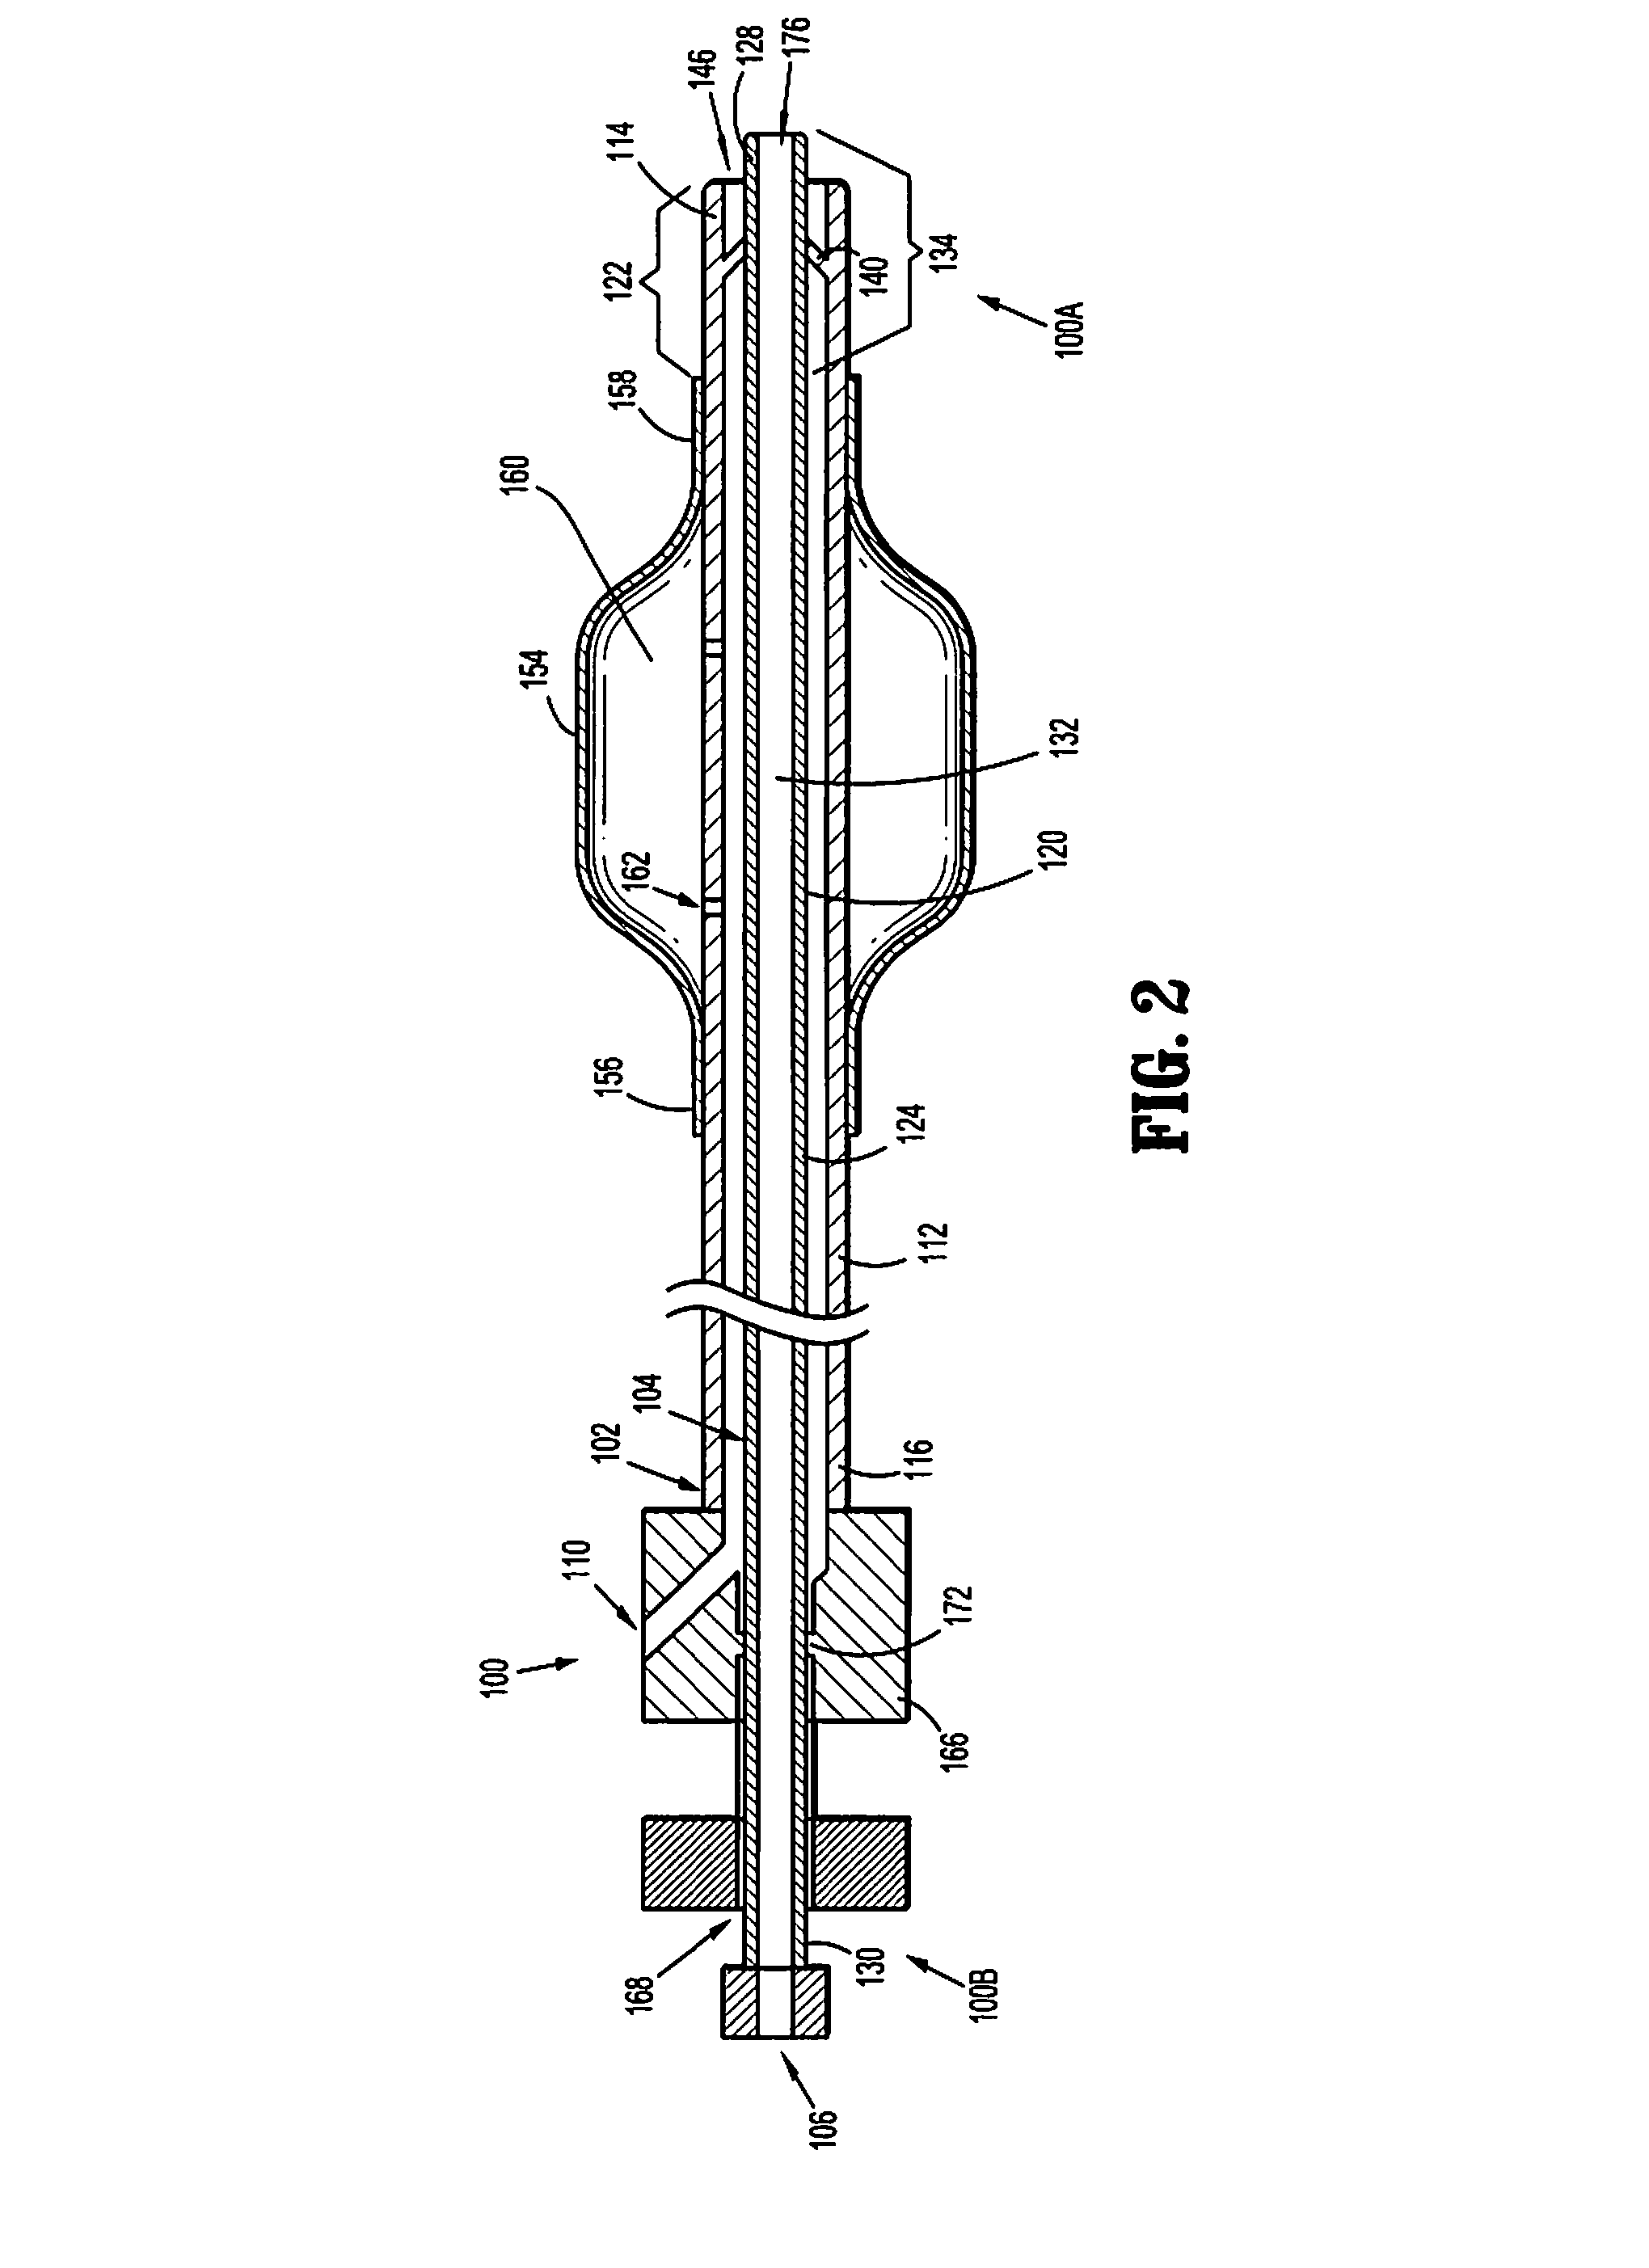 Apparatus and method for delivering an embolic composition